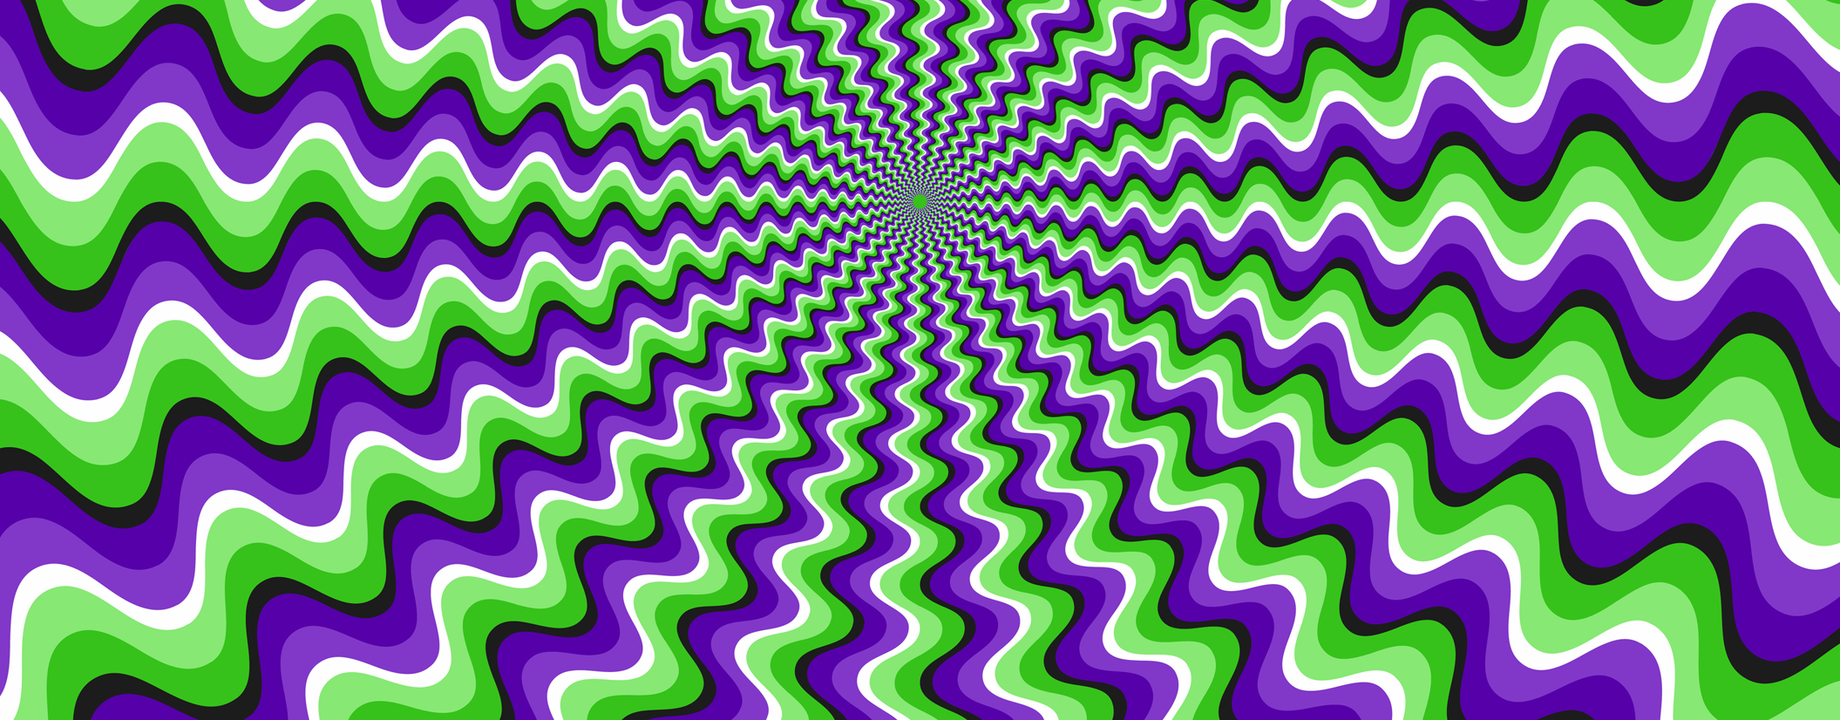 Tik Toker Blows Millions Of Minds With Optical Illusions And Tutorials